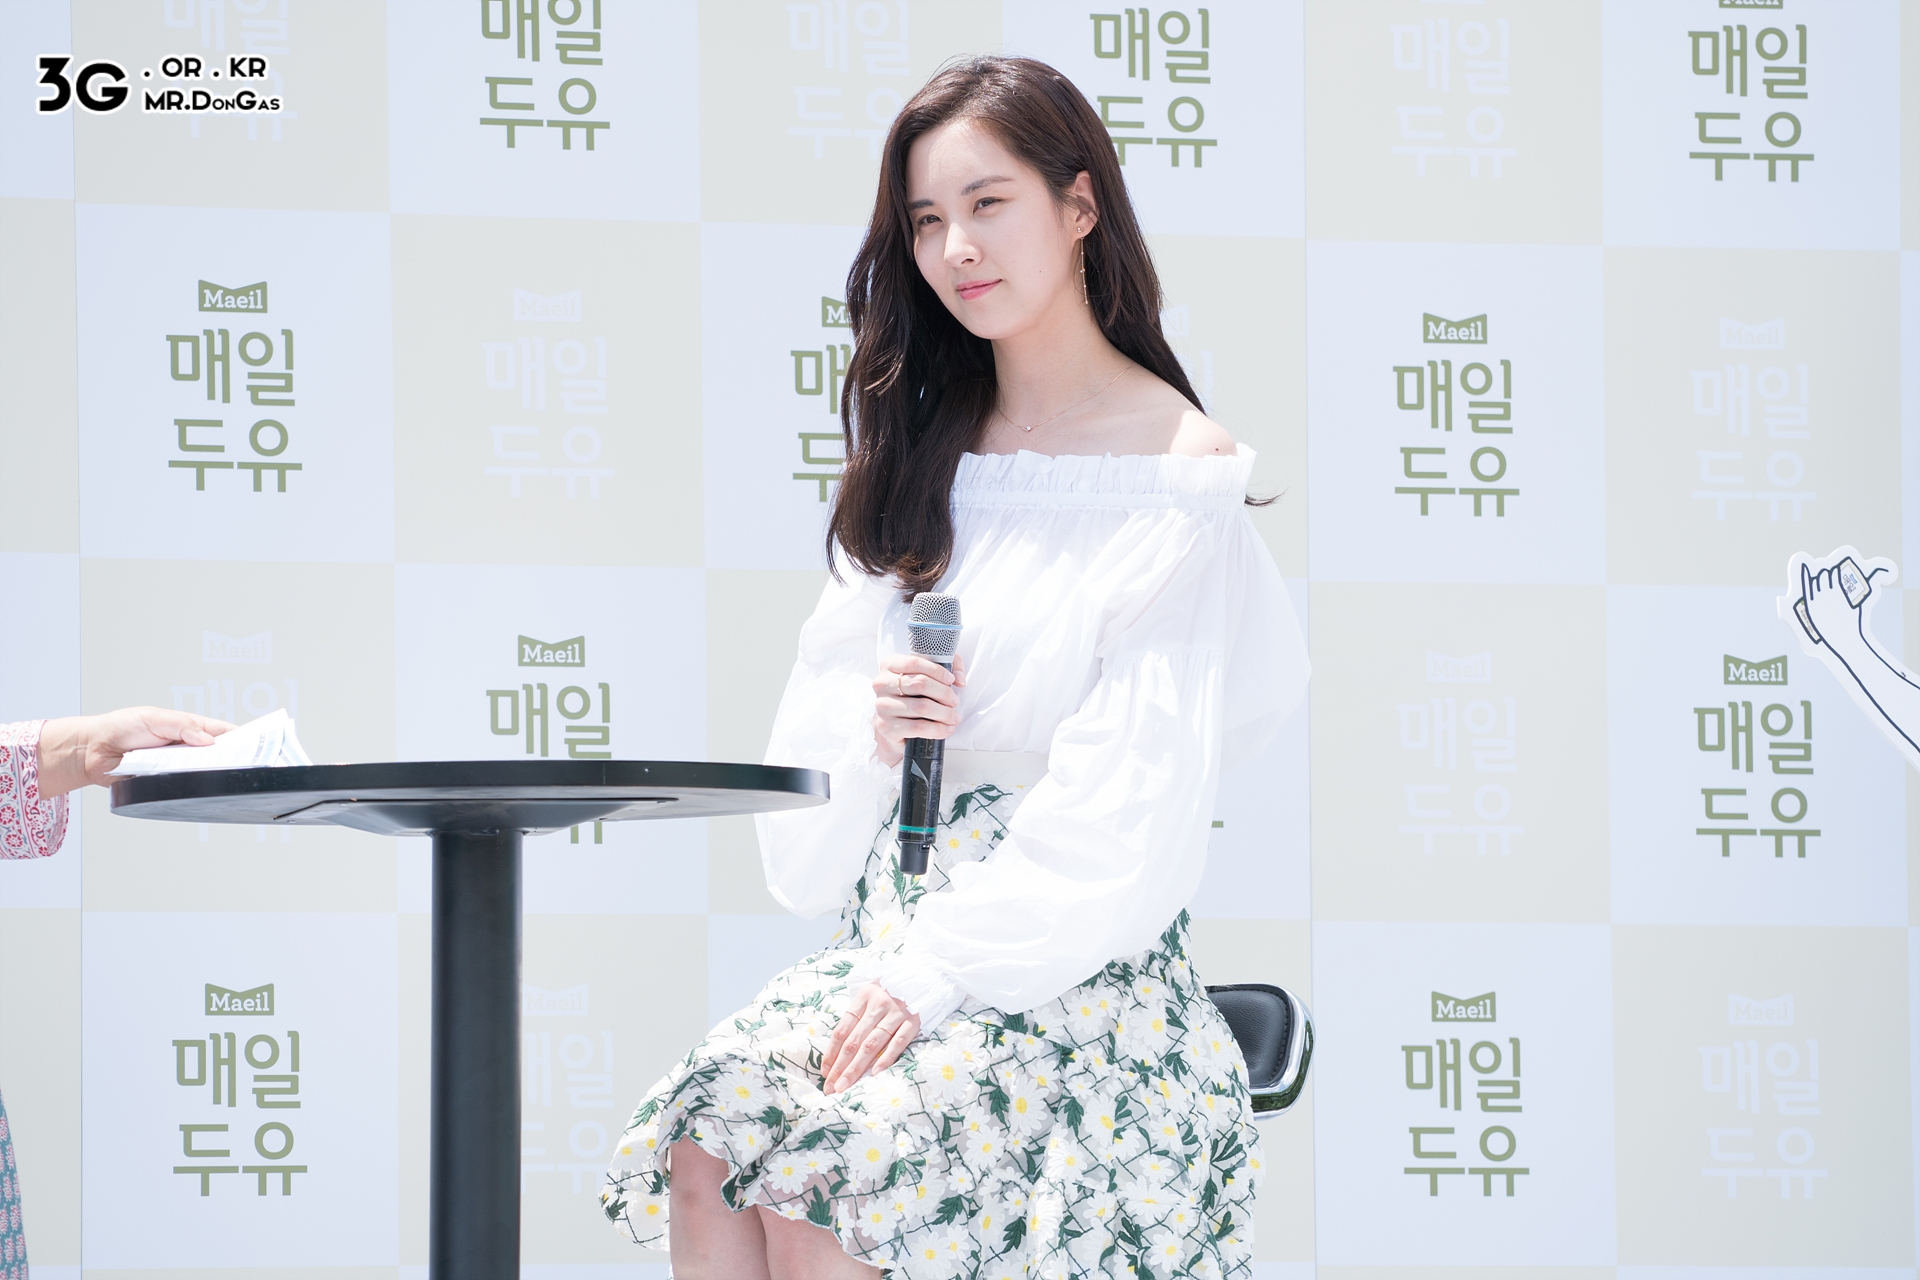  [PIC][03-06-2017]SeoHyun tham dự sự kiện “City Forestival - Maeil Duyou 'Confidence Diary'” vào chiều nay - Page 2 243377465933CE222E9BED